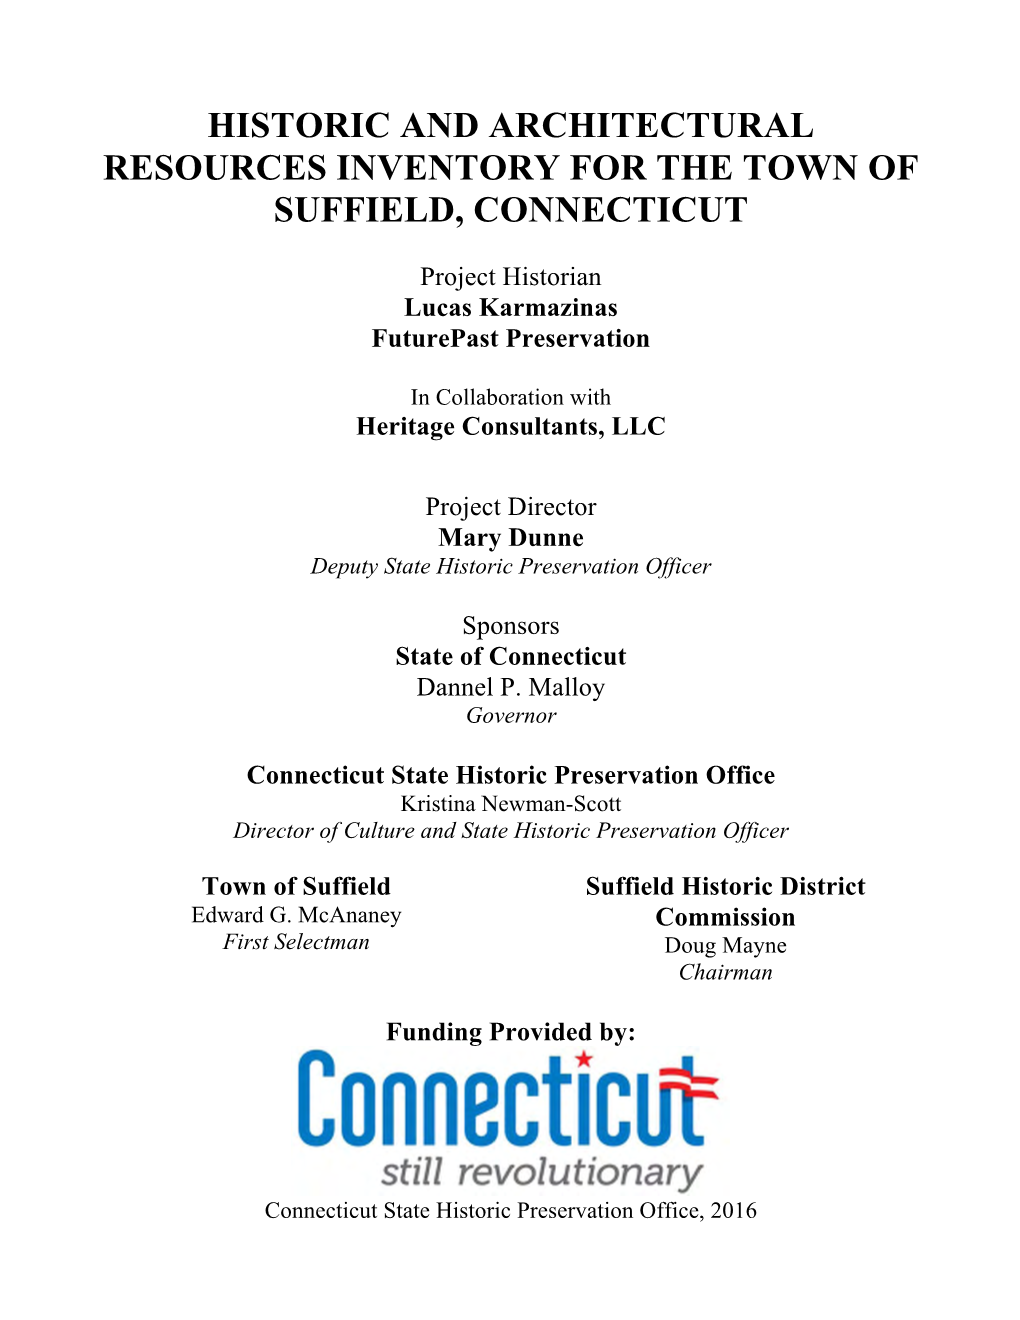 Historic and Architectural Resources Inventory for the Town of Suffield, Connecticut